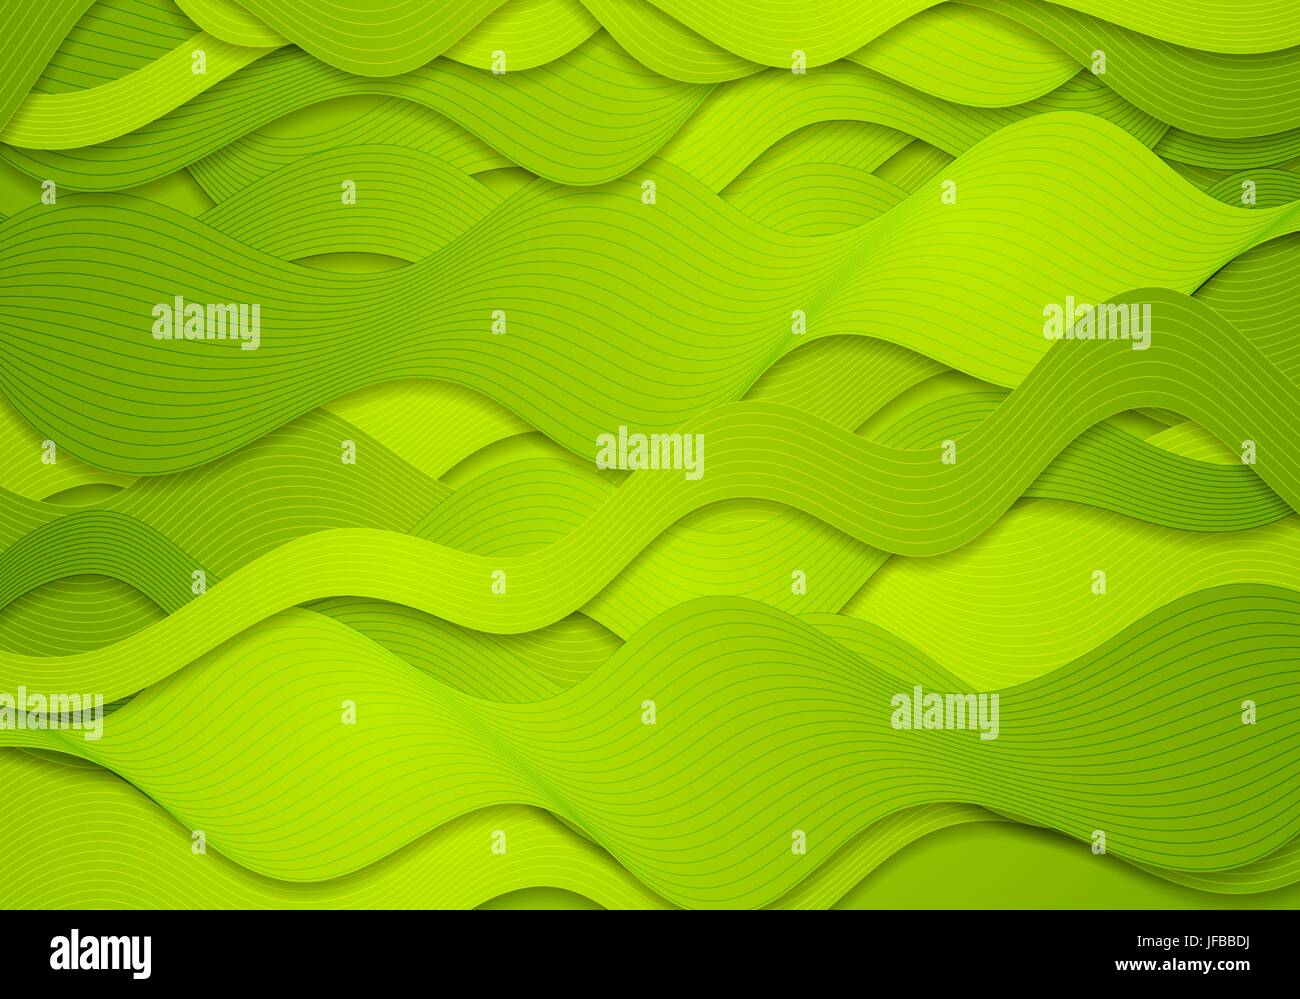 Abstract green curved waves Stock Photo